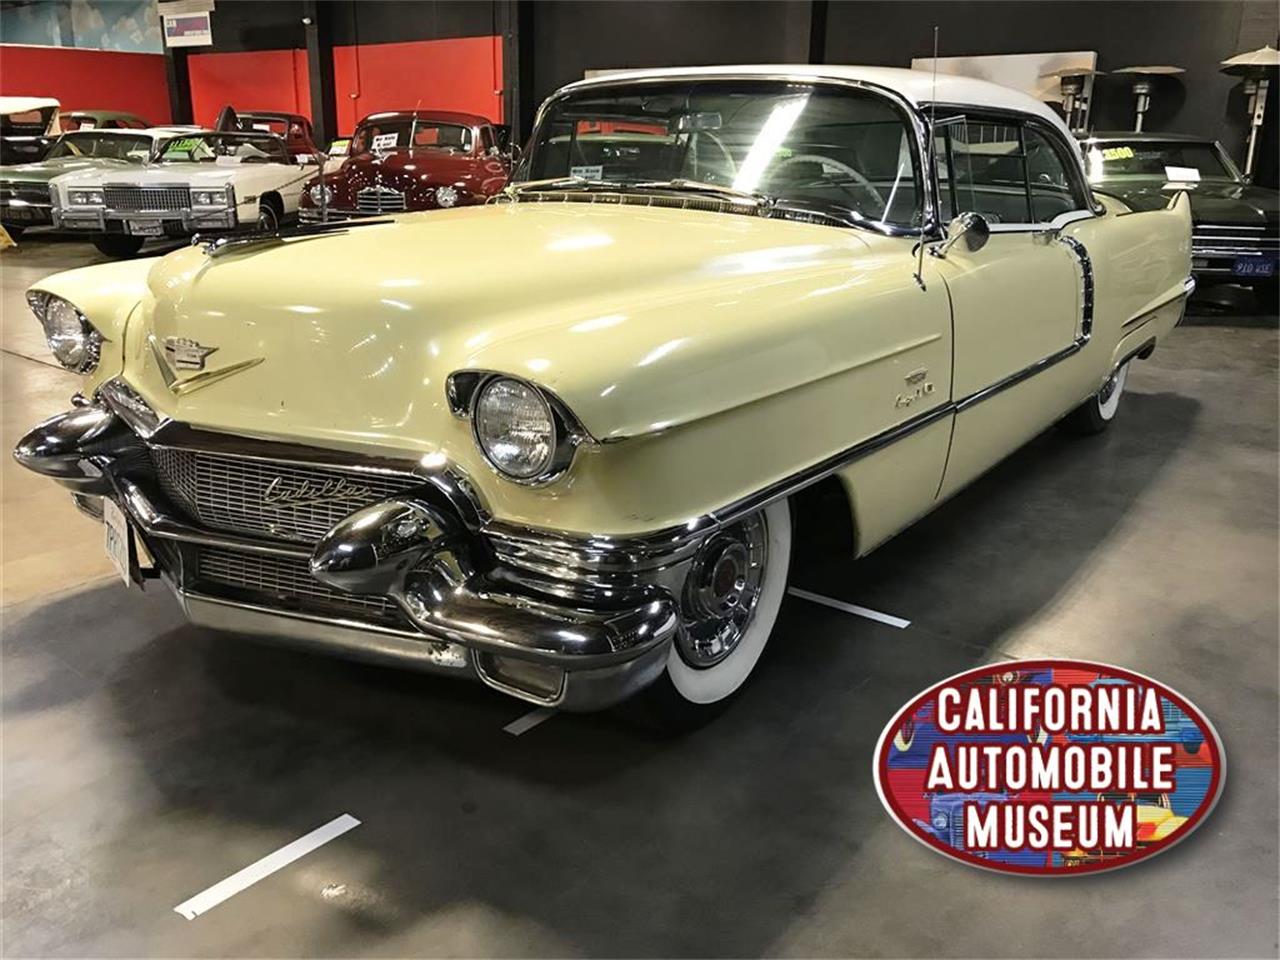 1956 cadillac coupe deville for sale in sacramento ca classiccarsbay com 1956 cadillac coupe deville for sale in